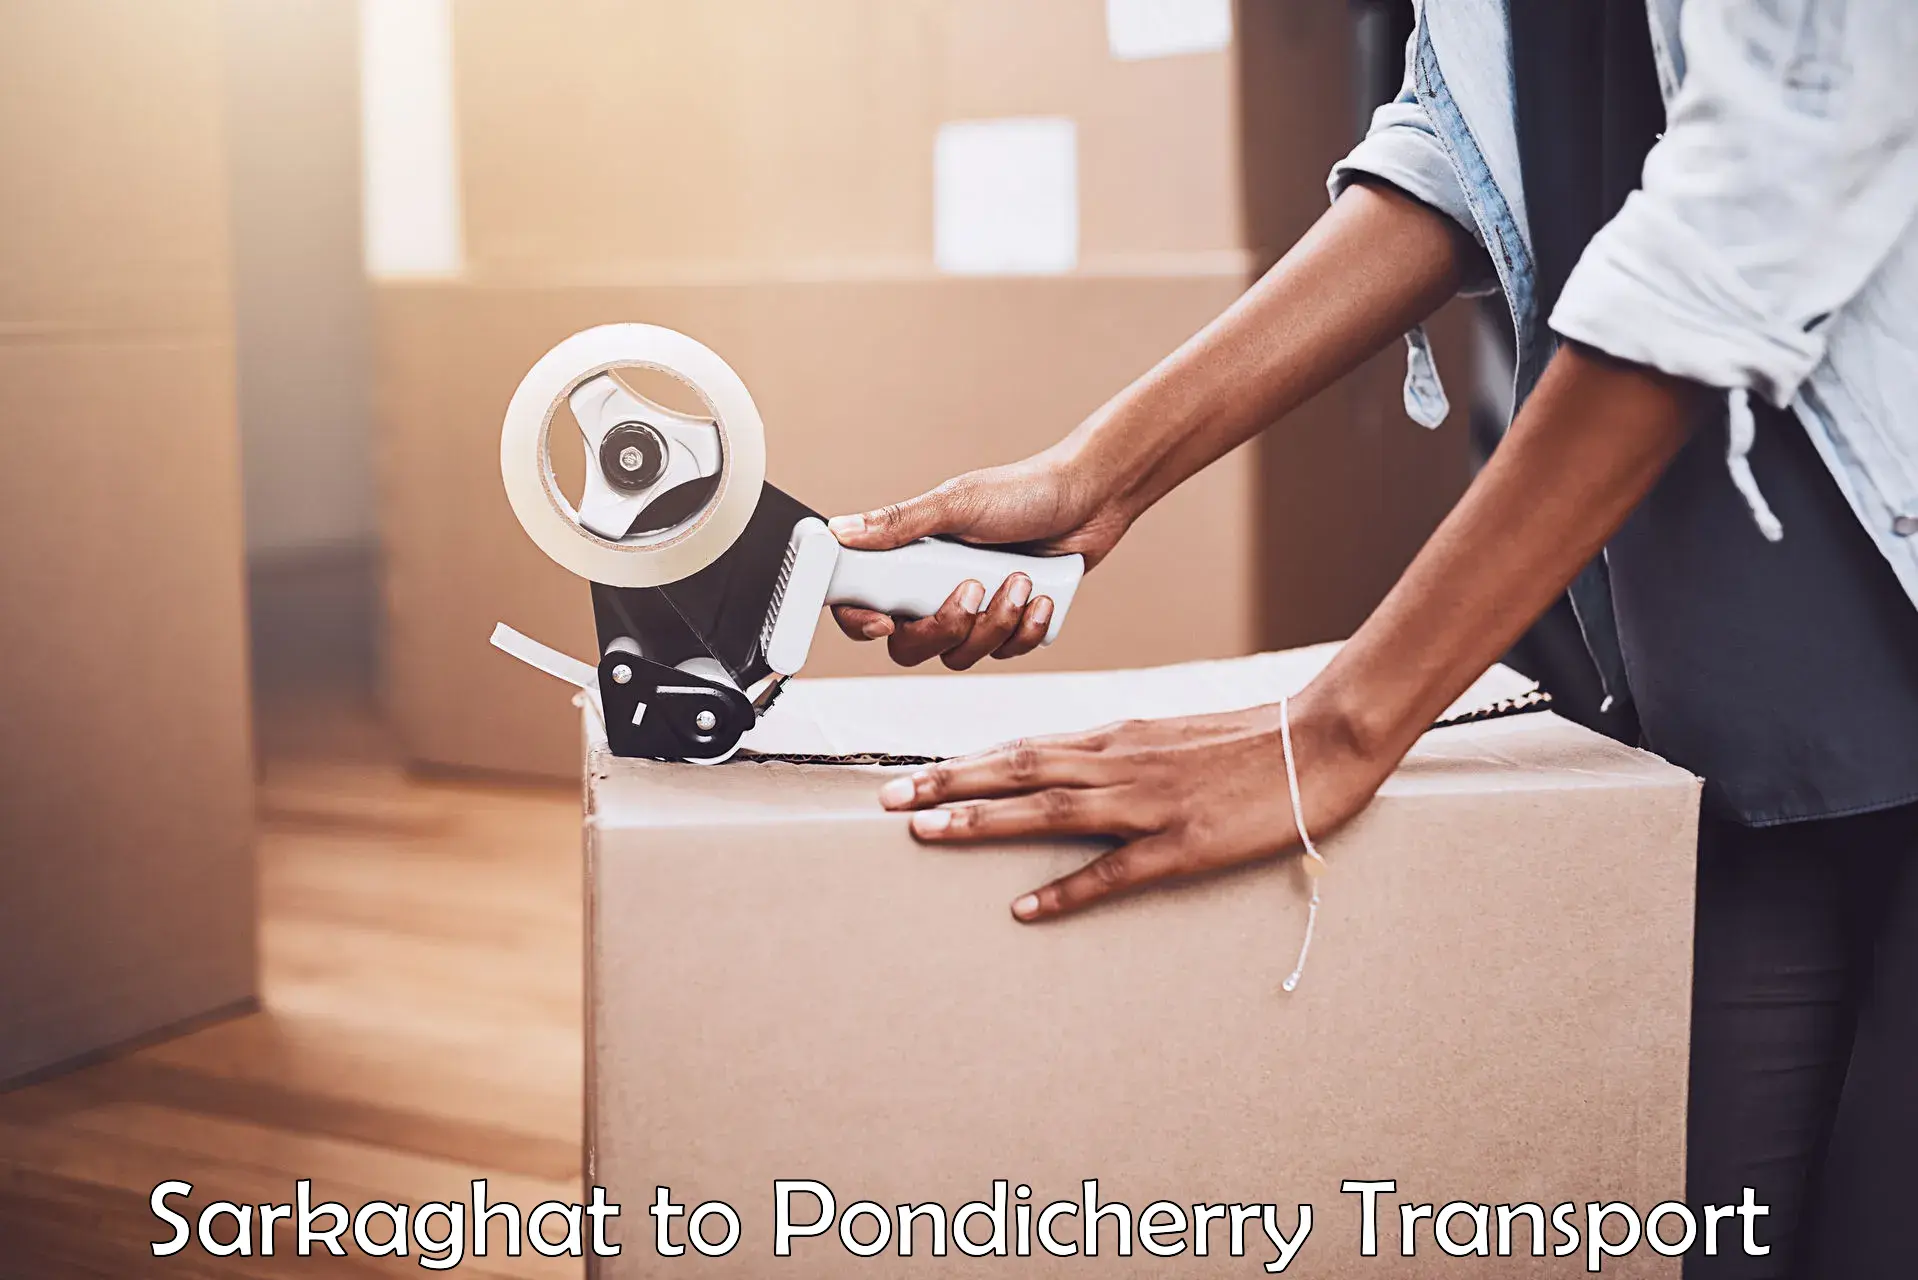 Container transport service Sarkaghat to Pondicherry University